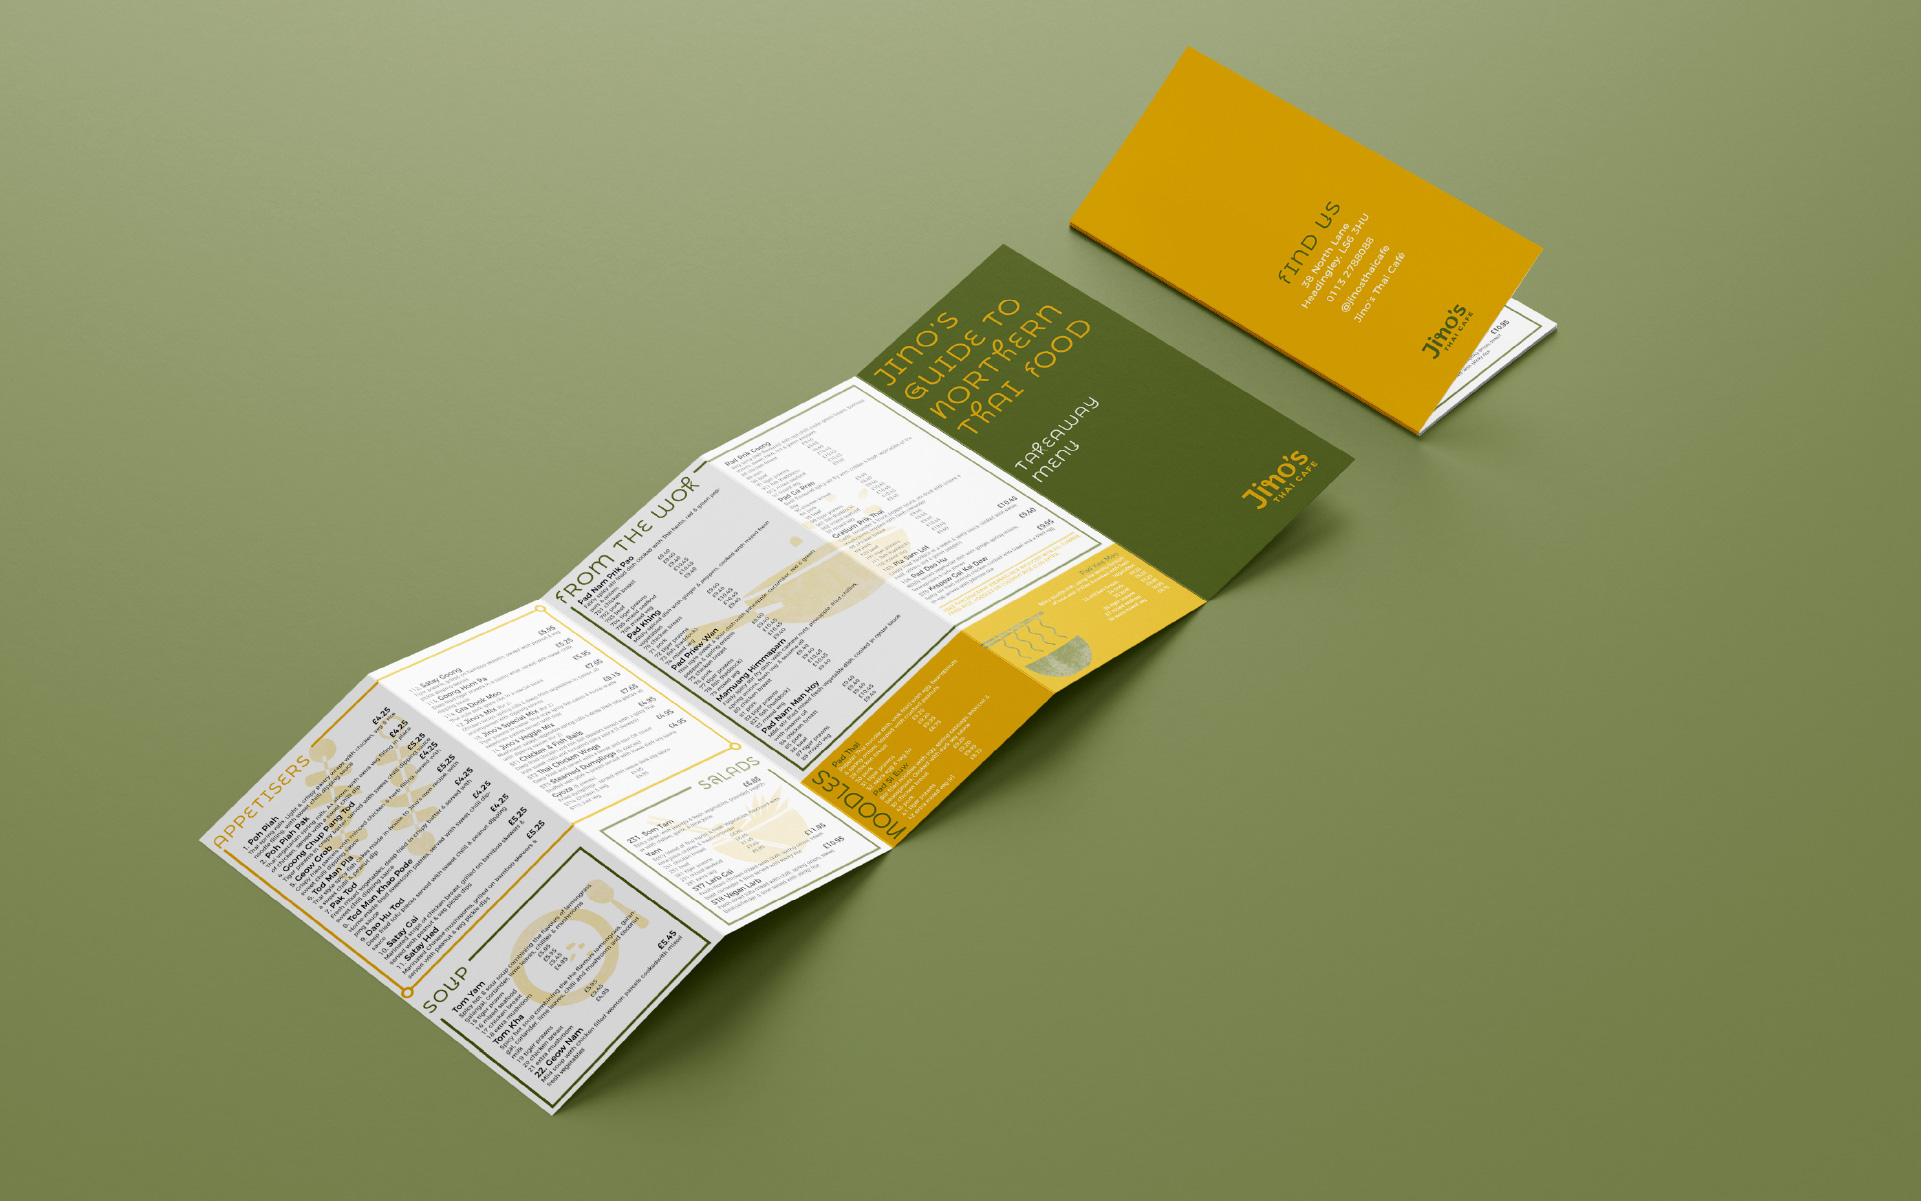 Take-away menu of Jino's Thai café using the brand colours and bespoke typography and icons